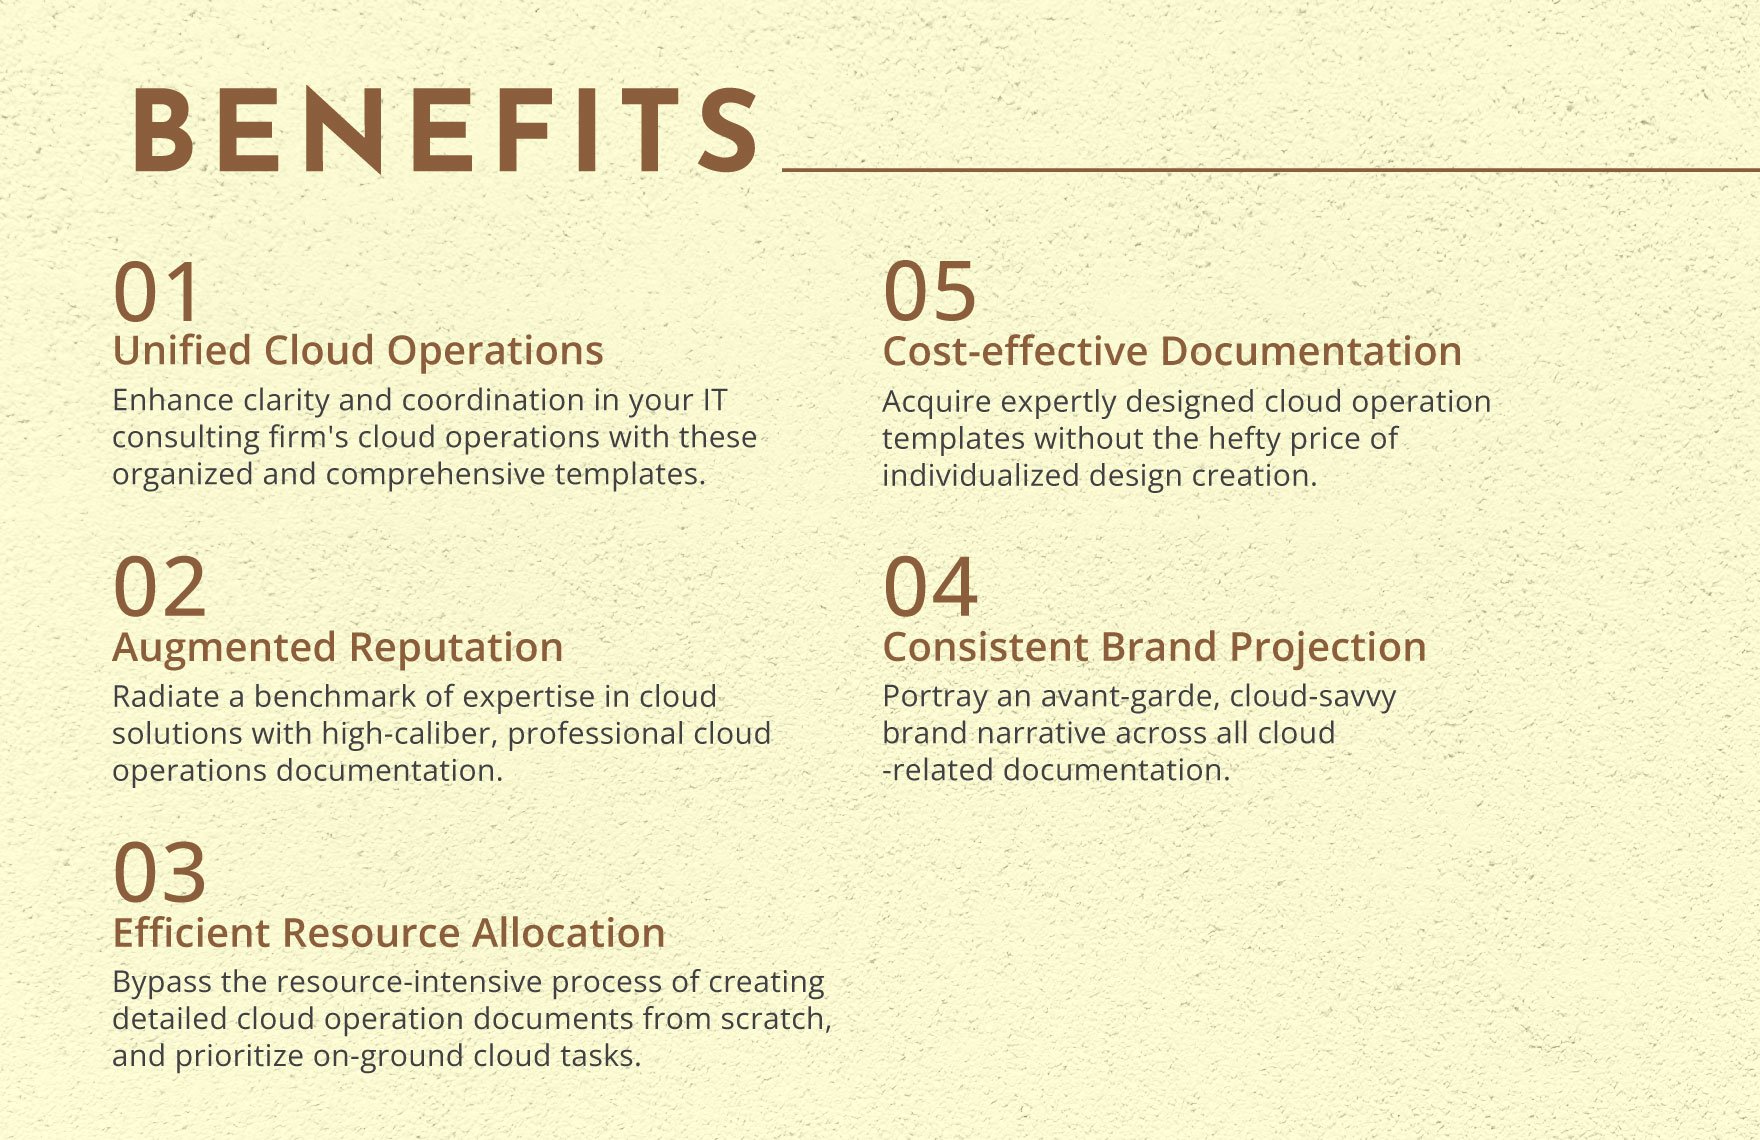 IT Cloud Resource Allocation Plan Template